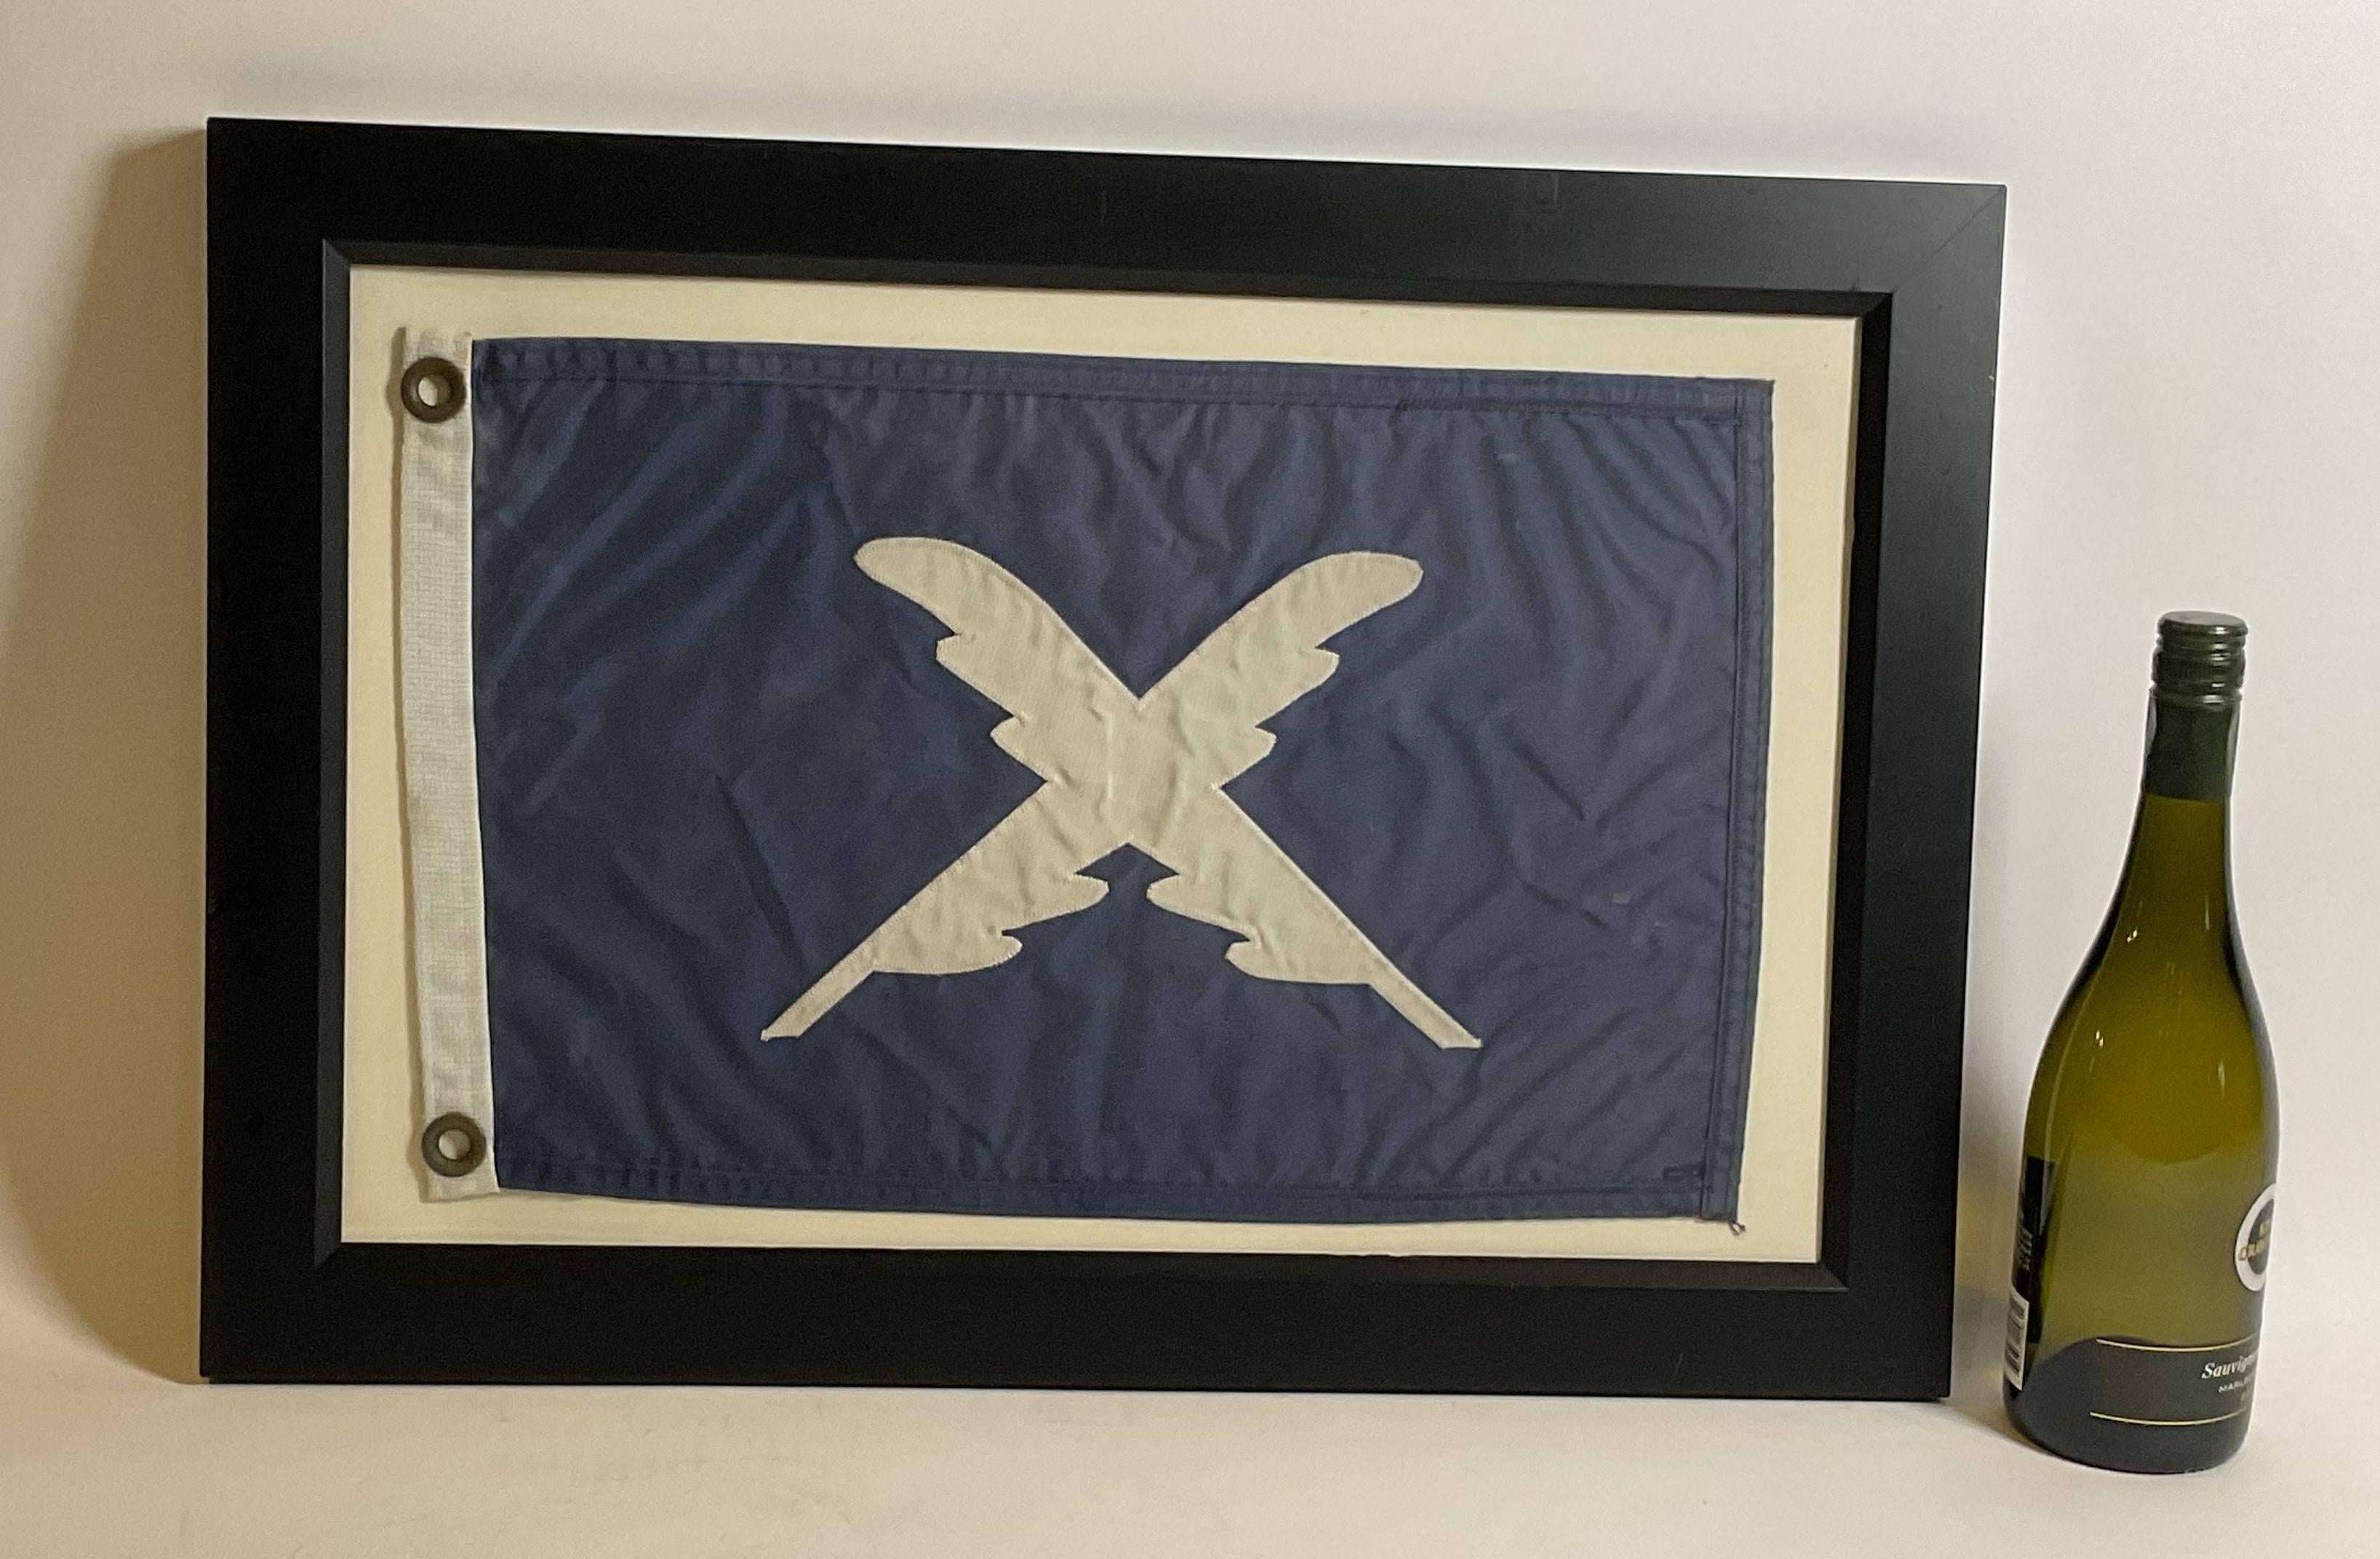 Nautical flag in frame with glass. Blue flag with crossed feathered quills. Blue field with white applied letters. White hoist with brass grommets.

Weight: 5 lbs.
Overall Dimensions: 17